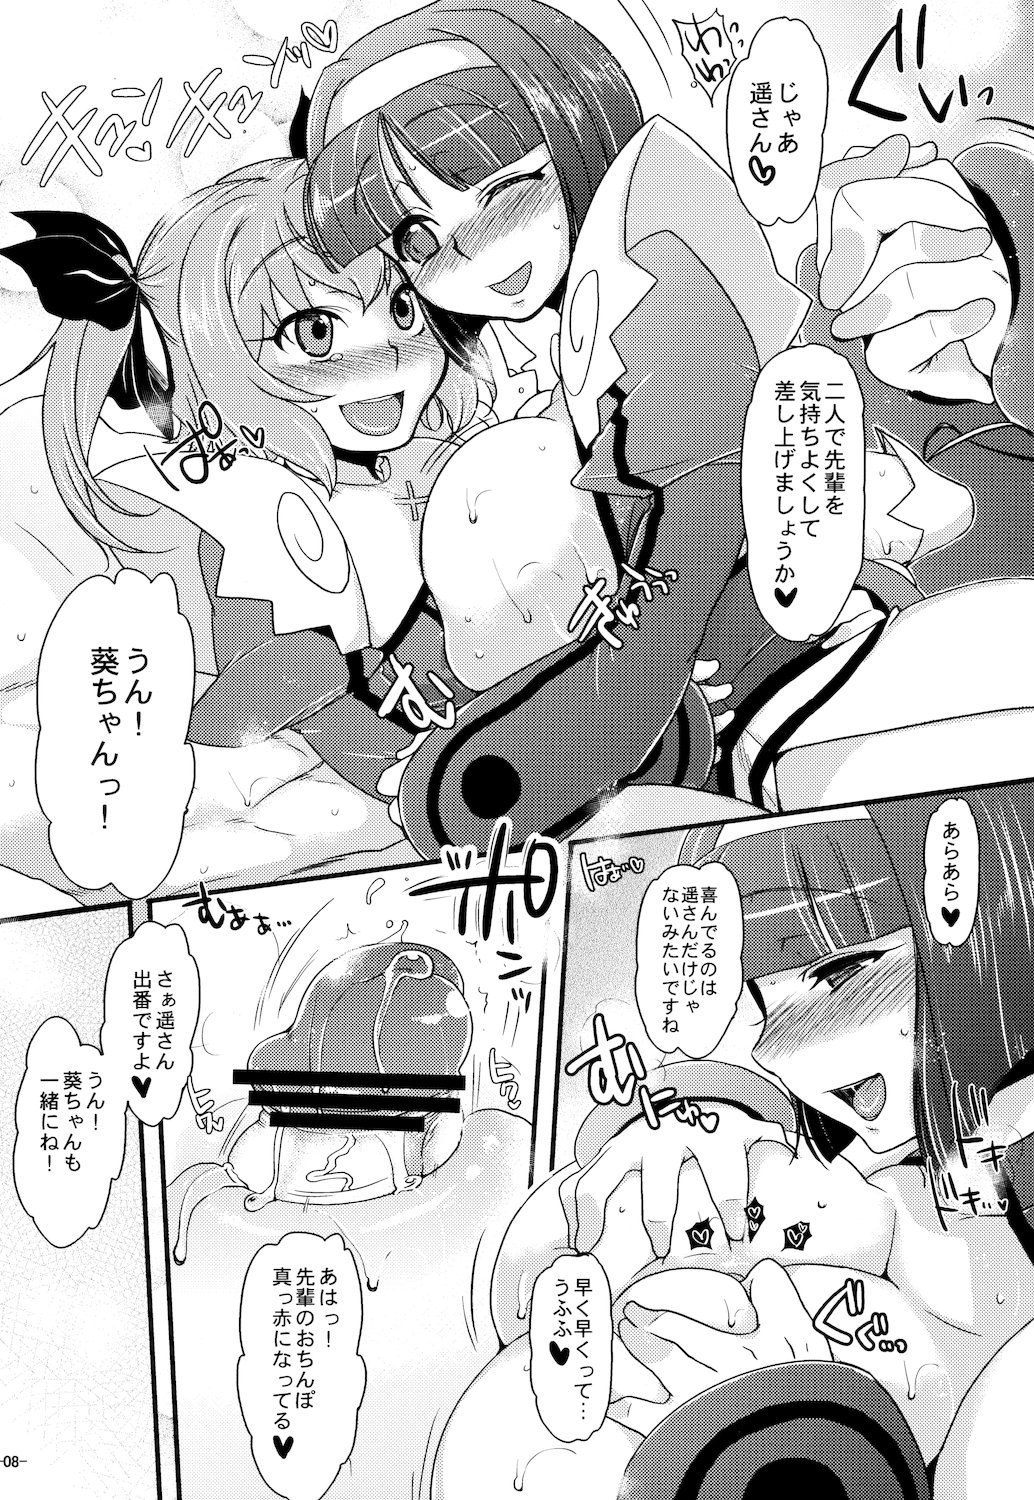 (Angel Time 6) [NIGHT FUCKERS (Mitsugi)] x3 Angels (Kaitou Tenshi Twin Angel) page 8 full